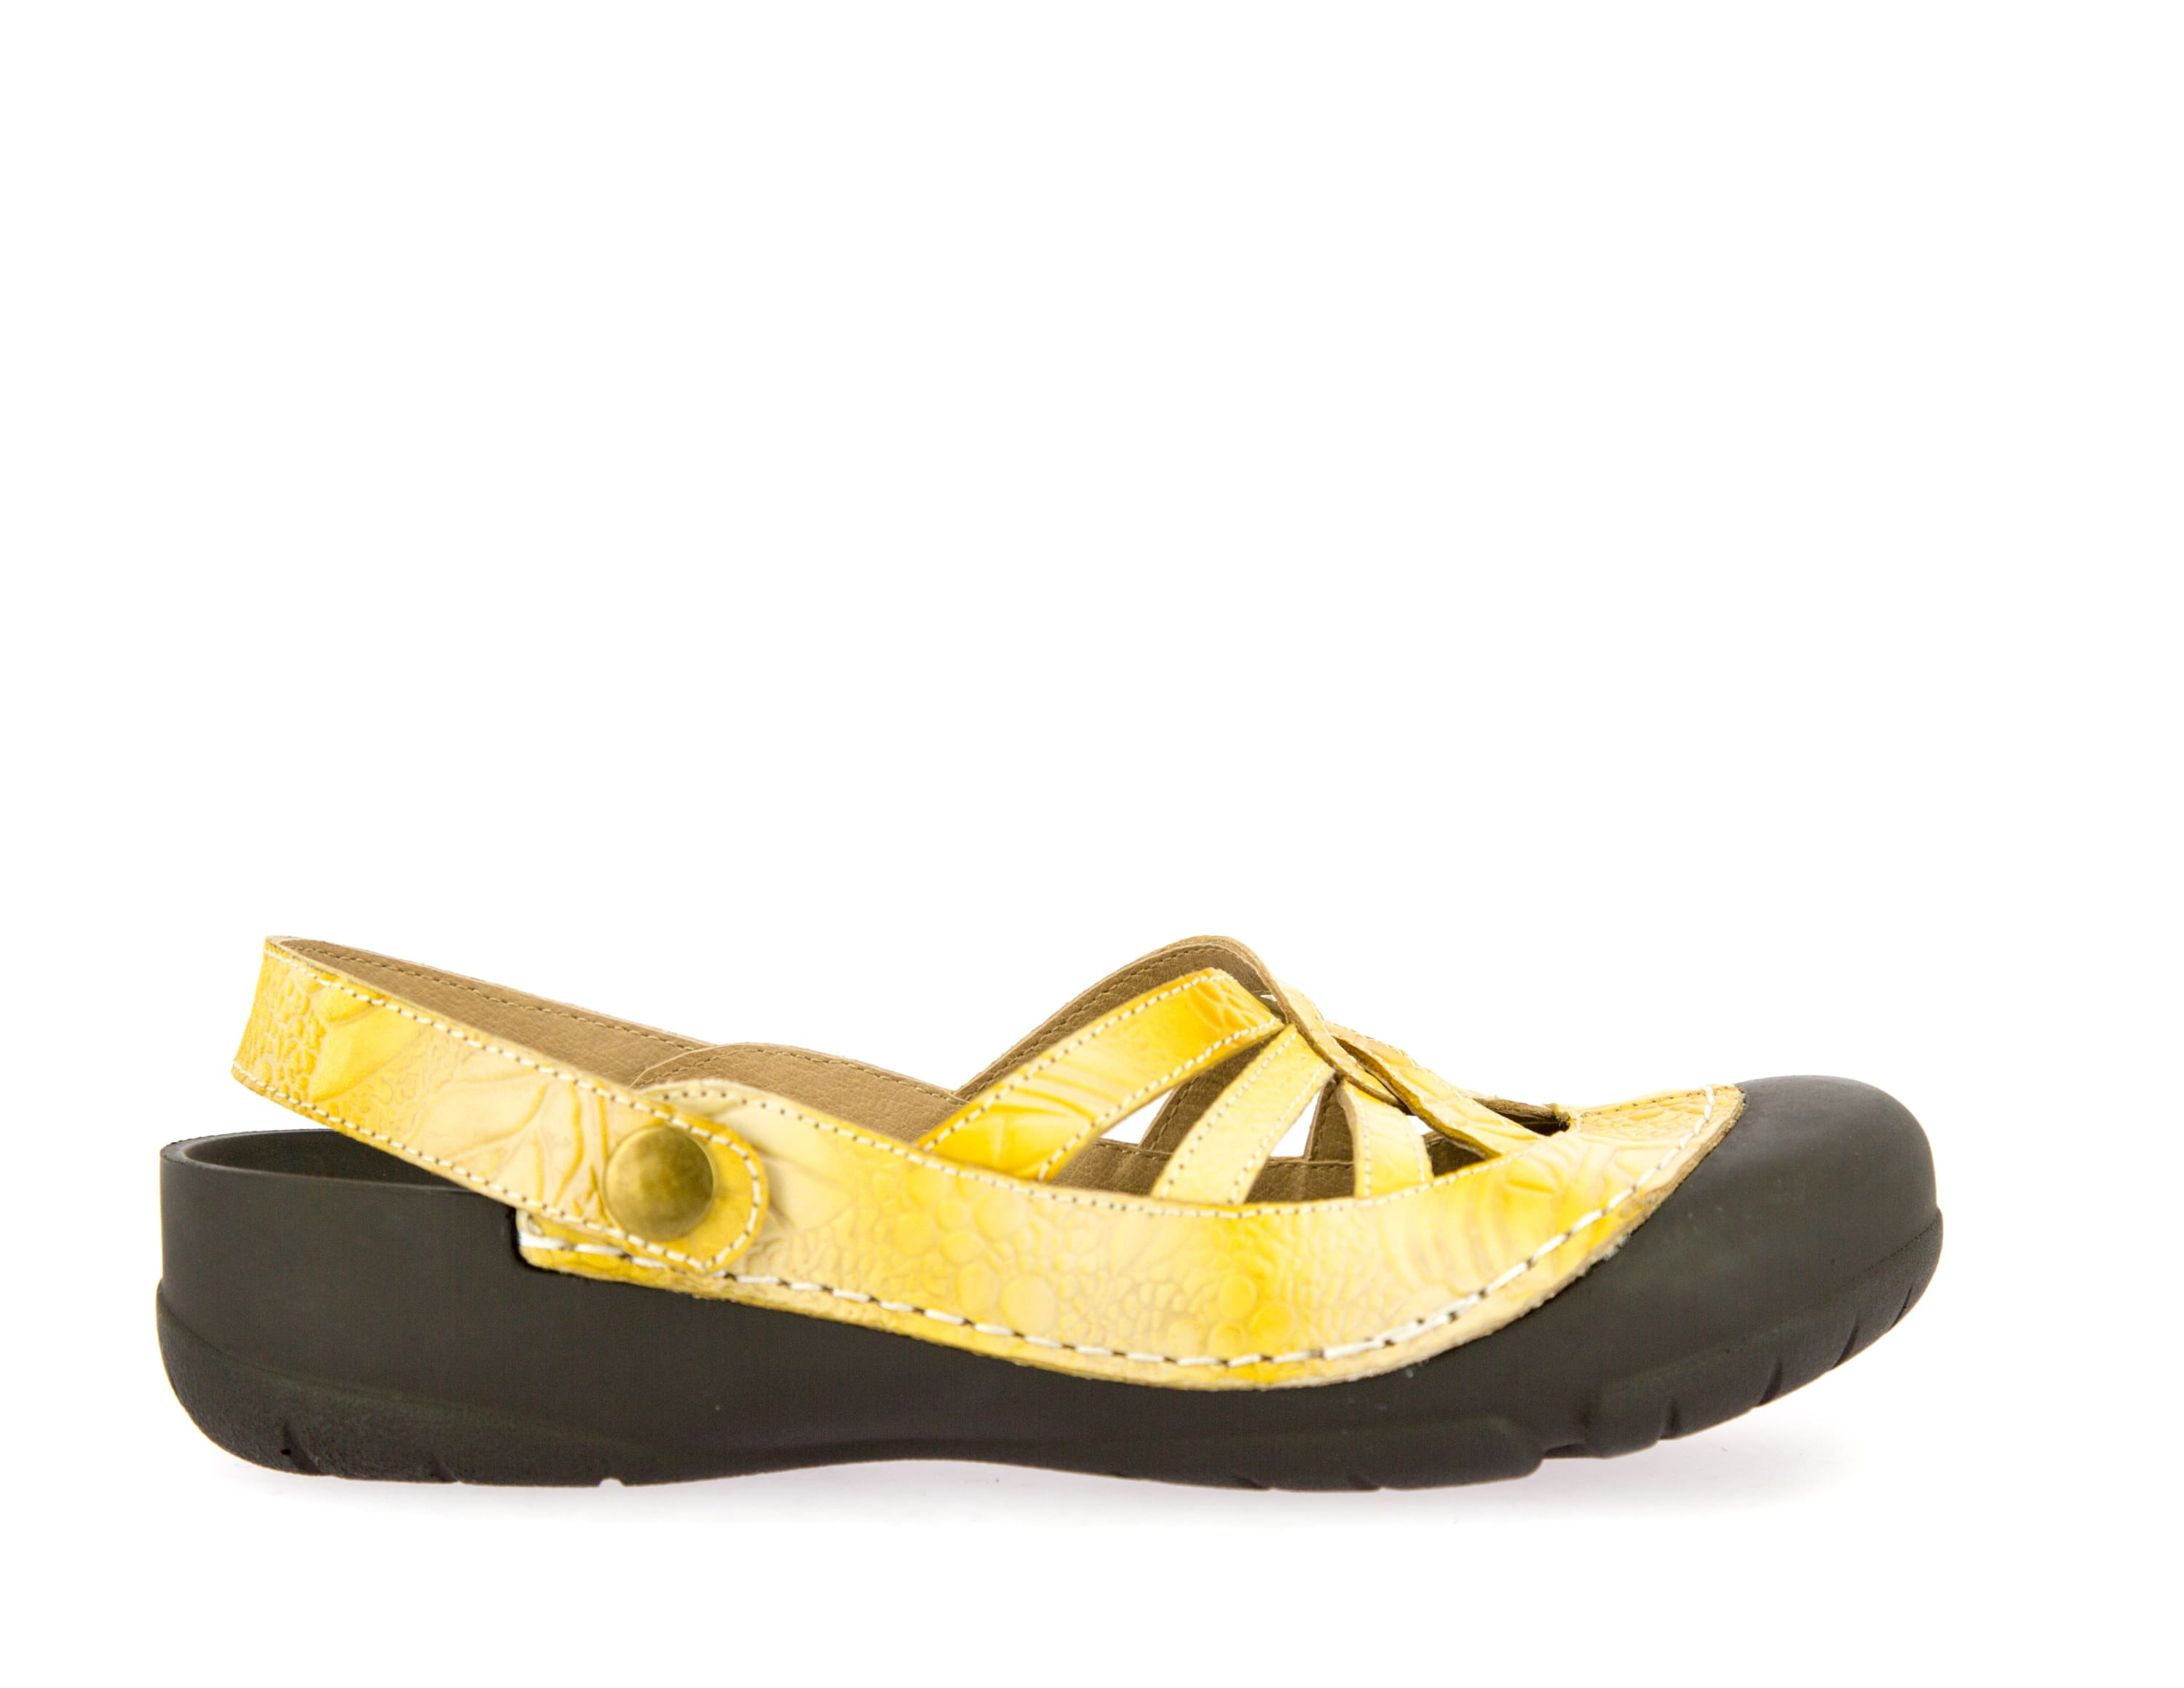 BEZIERS 04 shoes - 37 / Yellow - Mule